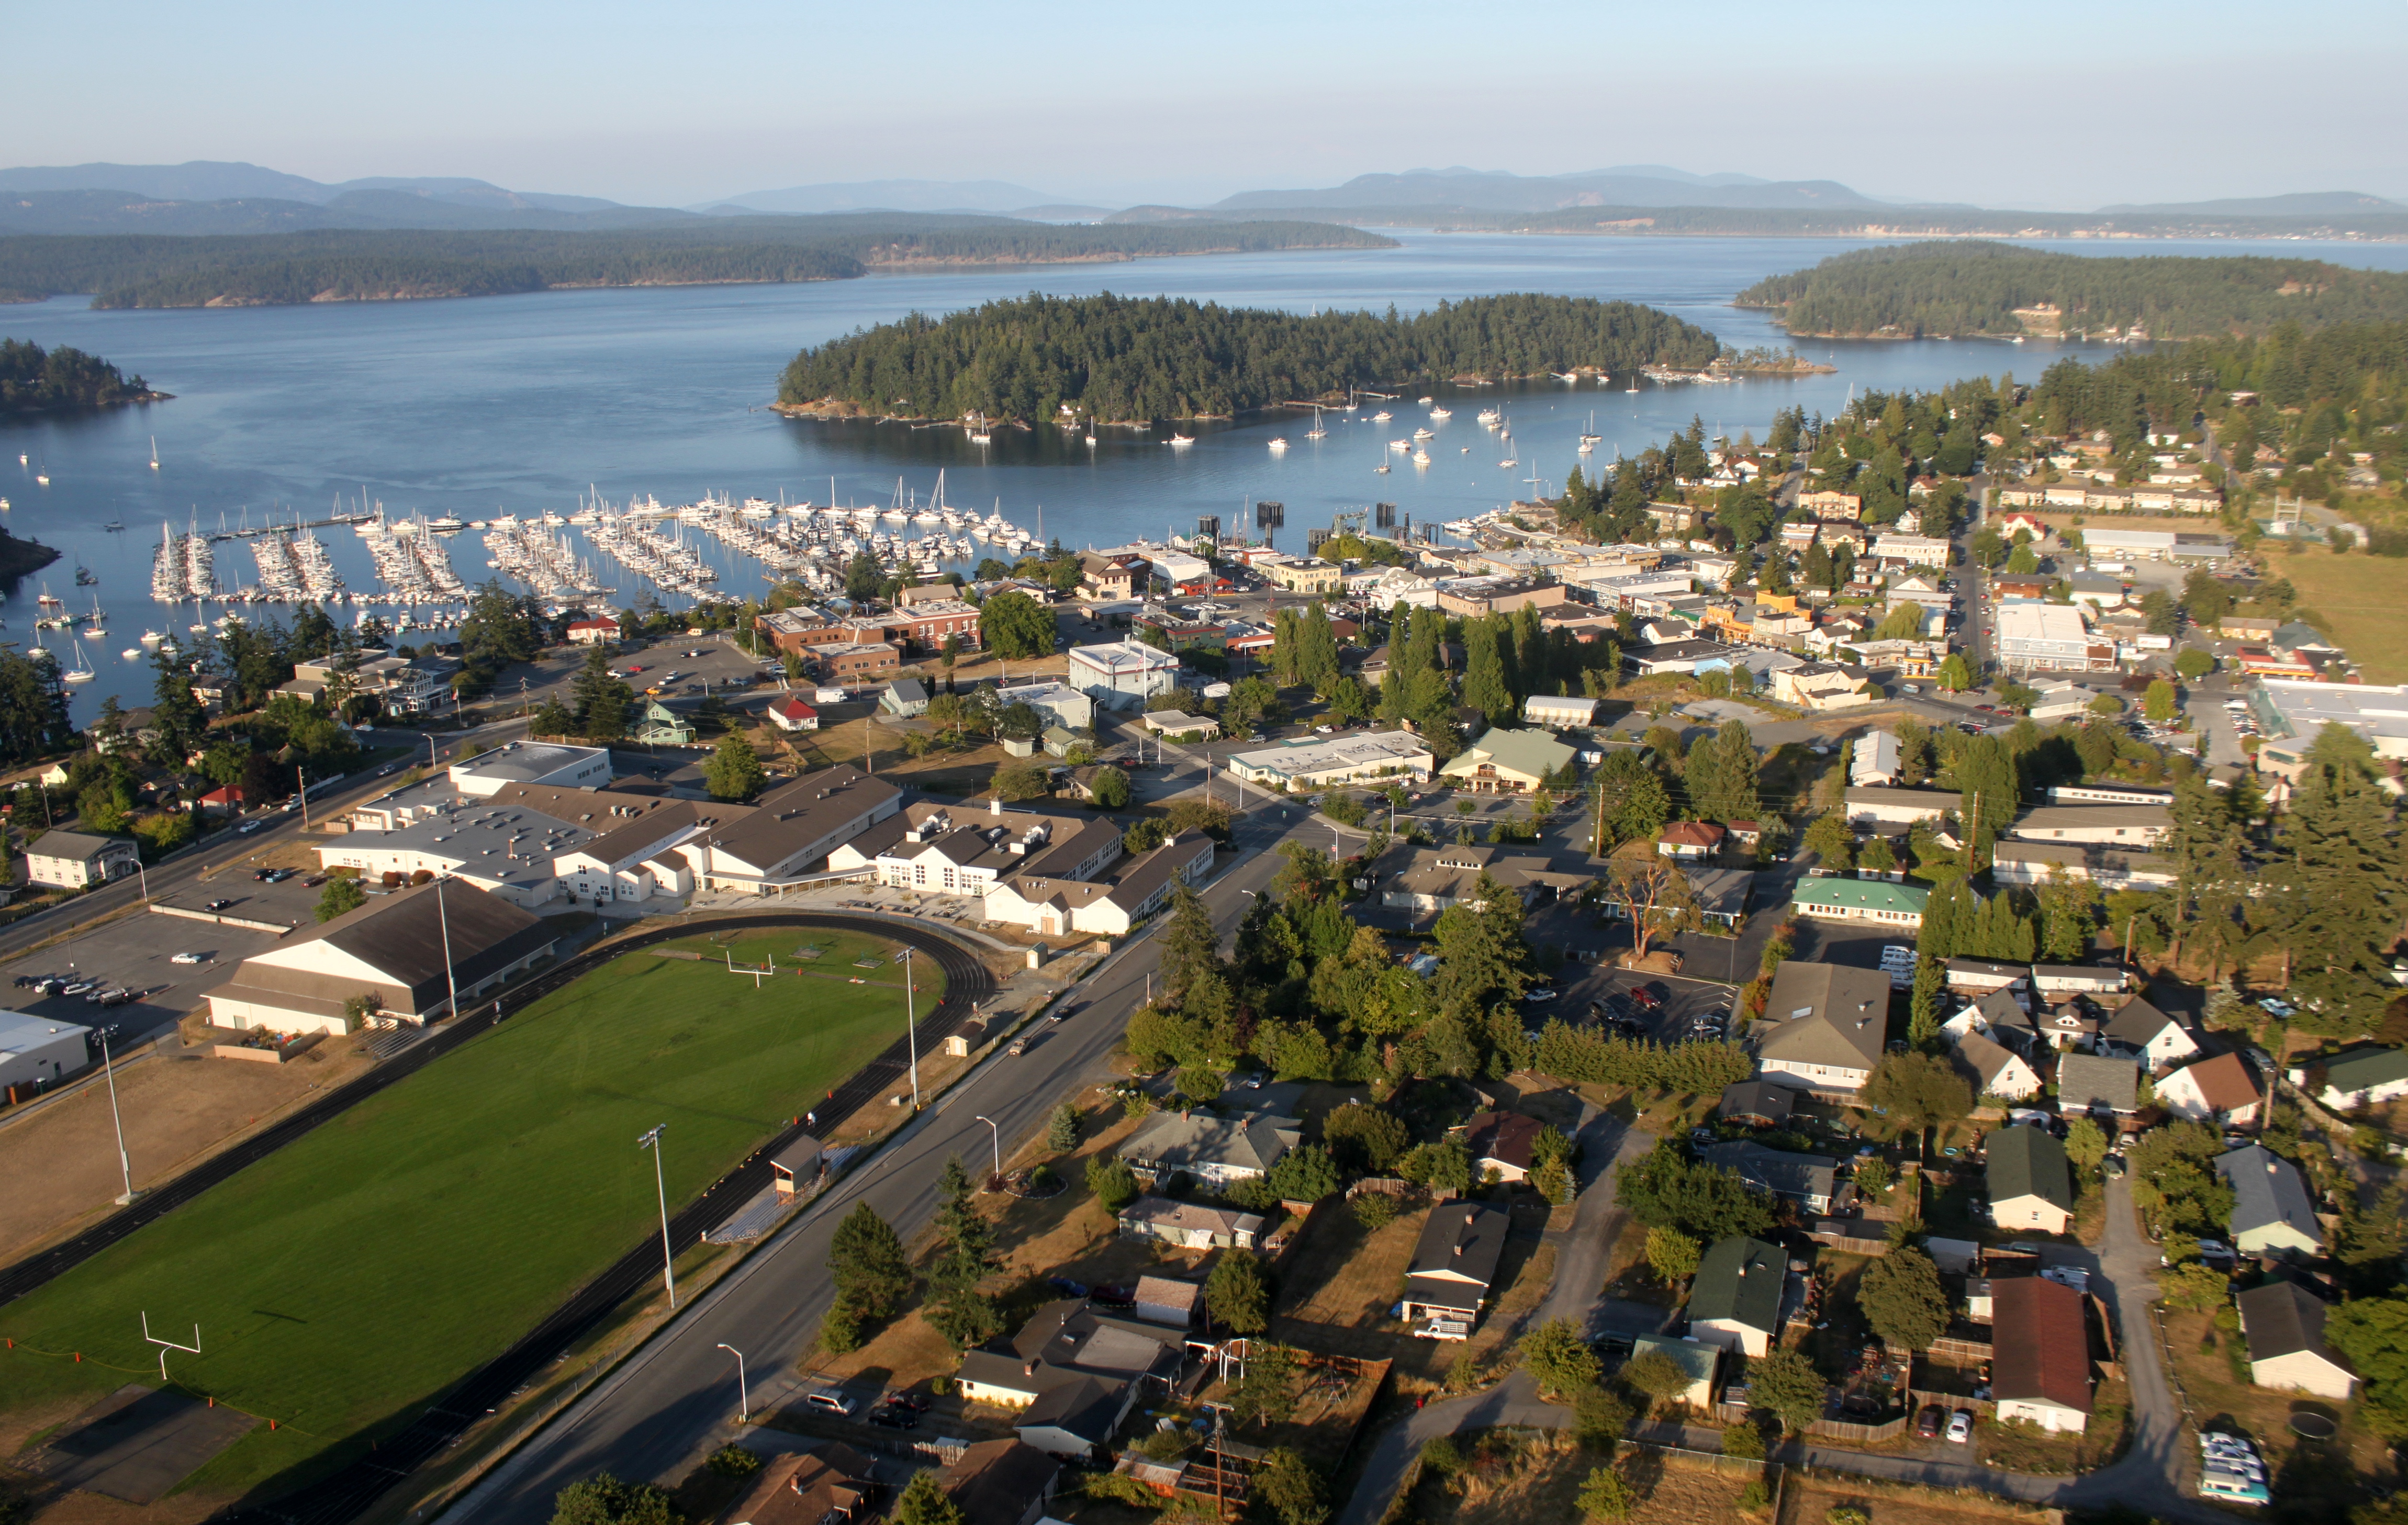 Aerial View of Friday Harbor, photo by Jelson25 via Wikimedia Commons